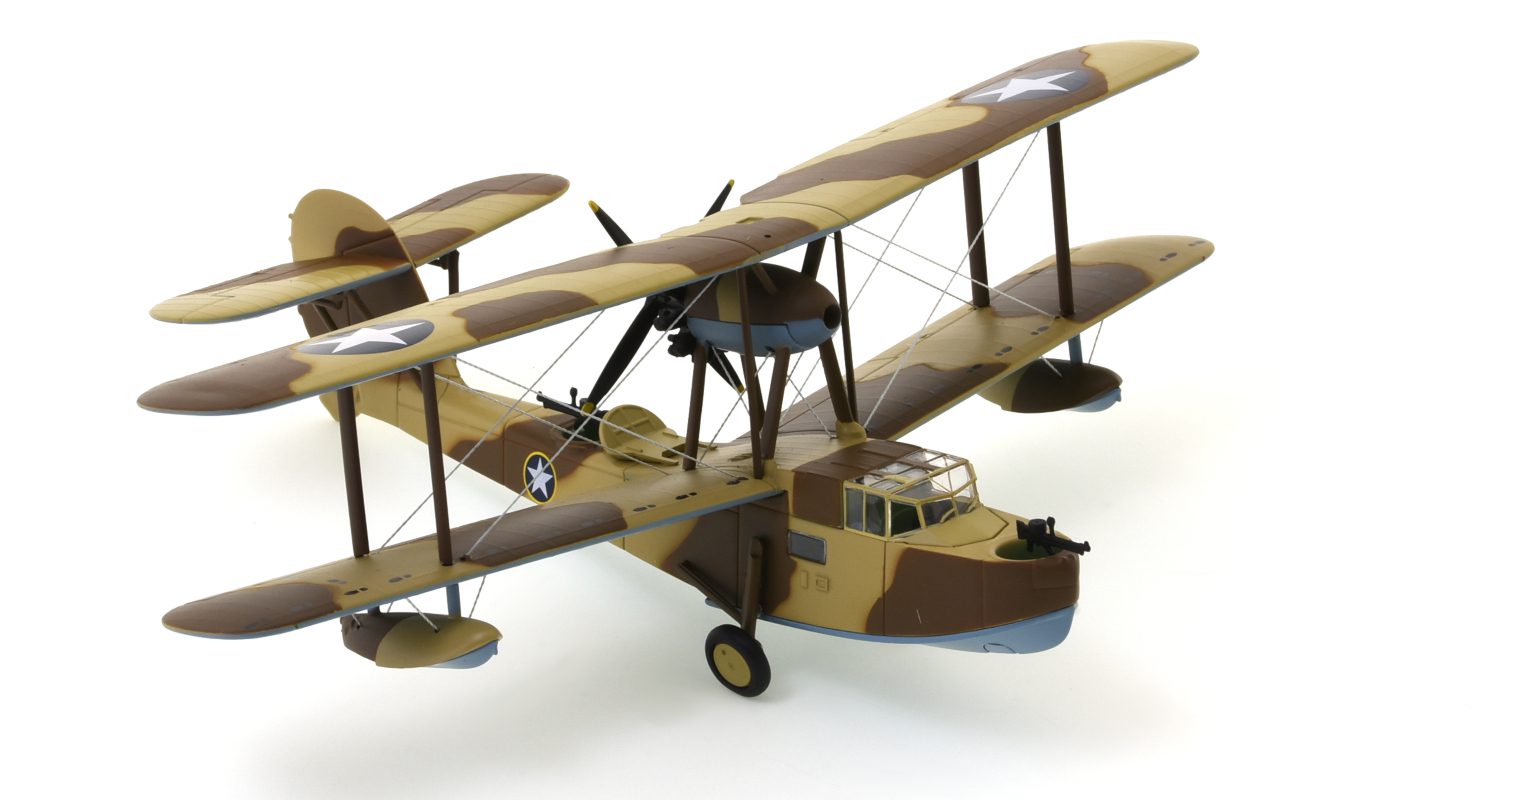 Front starboard side of the Supermarine Walrus I, 1/72 scale diecast model in the colour scheme worn during 